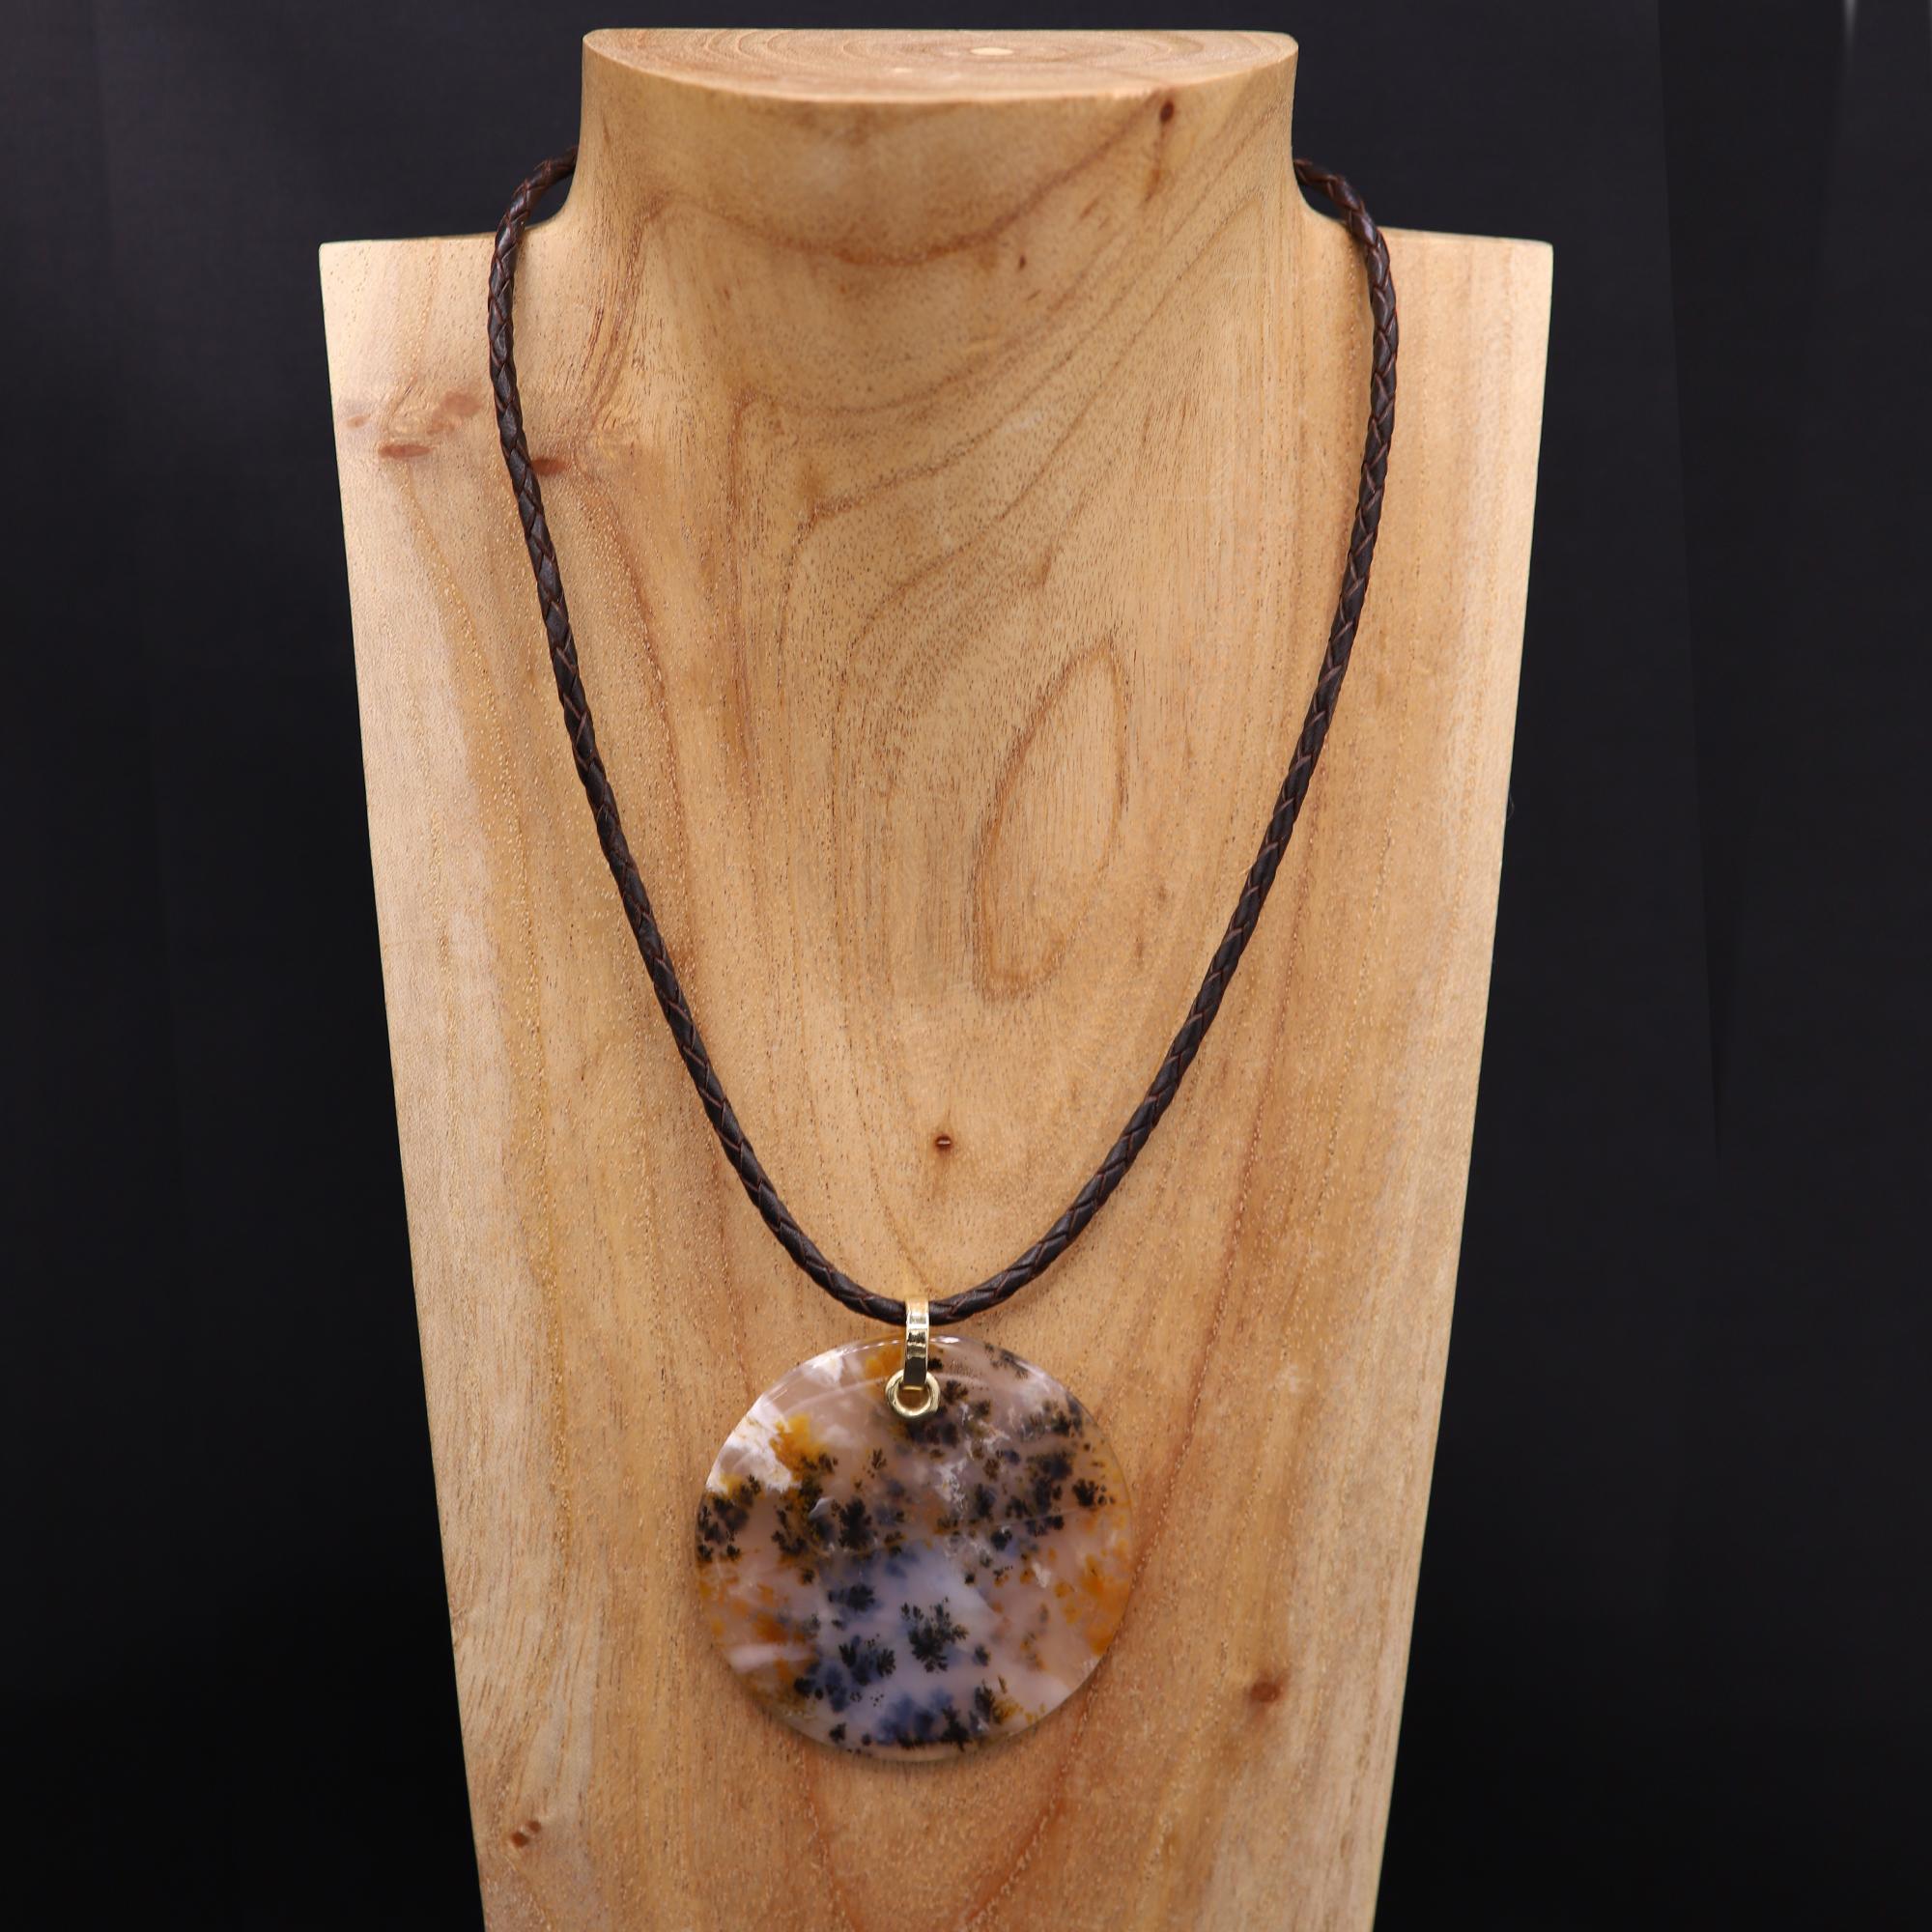 one-of-a kind- natural beatiful Moss Agate stone Necklace.
all parts are 14k Yellow Gold and Italian-made leather cord.
Adjustable length 17' - 19' inch and all in between. cord is dark brown.
Dendritic Moss-Agate is round 2' inch in diameter-